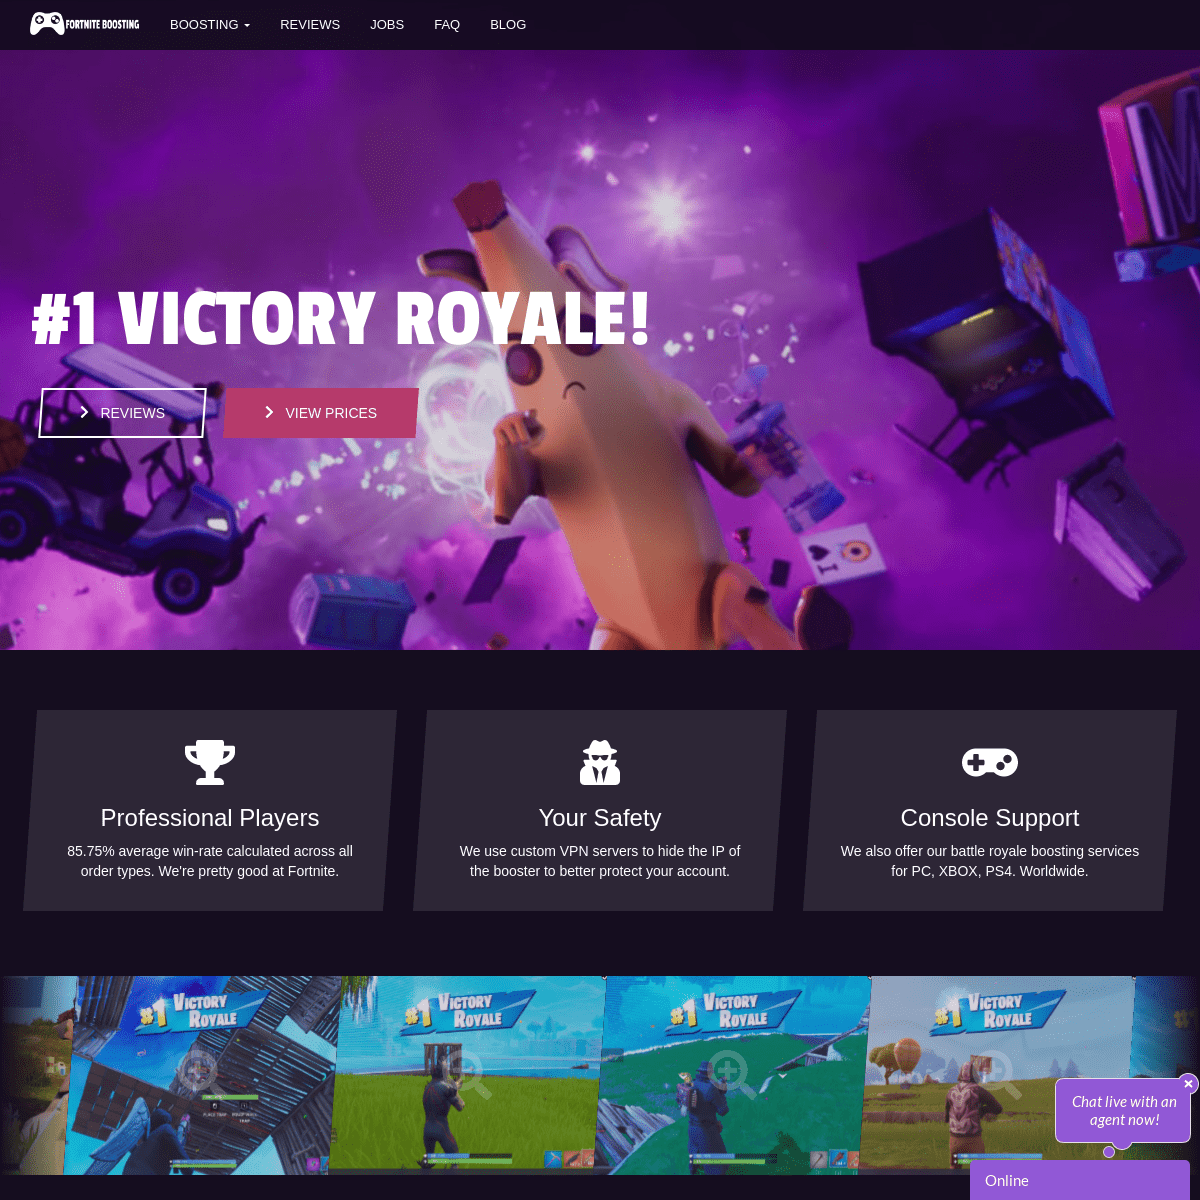 Fortnite Boosting and Coaching Service By Professionals